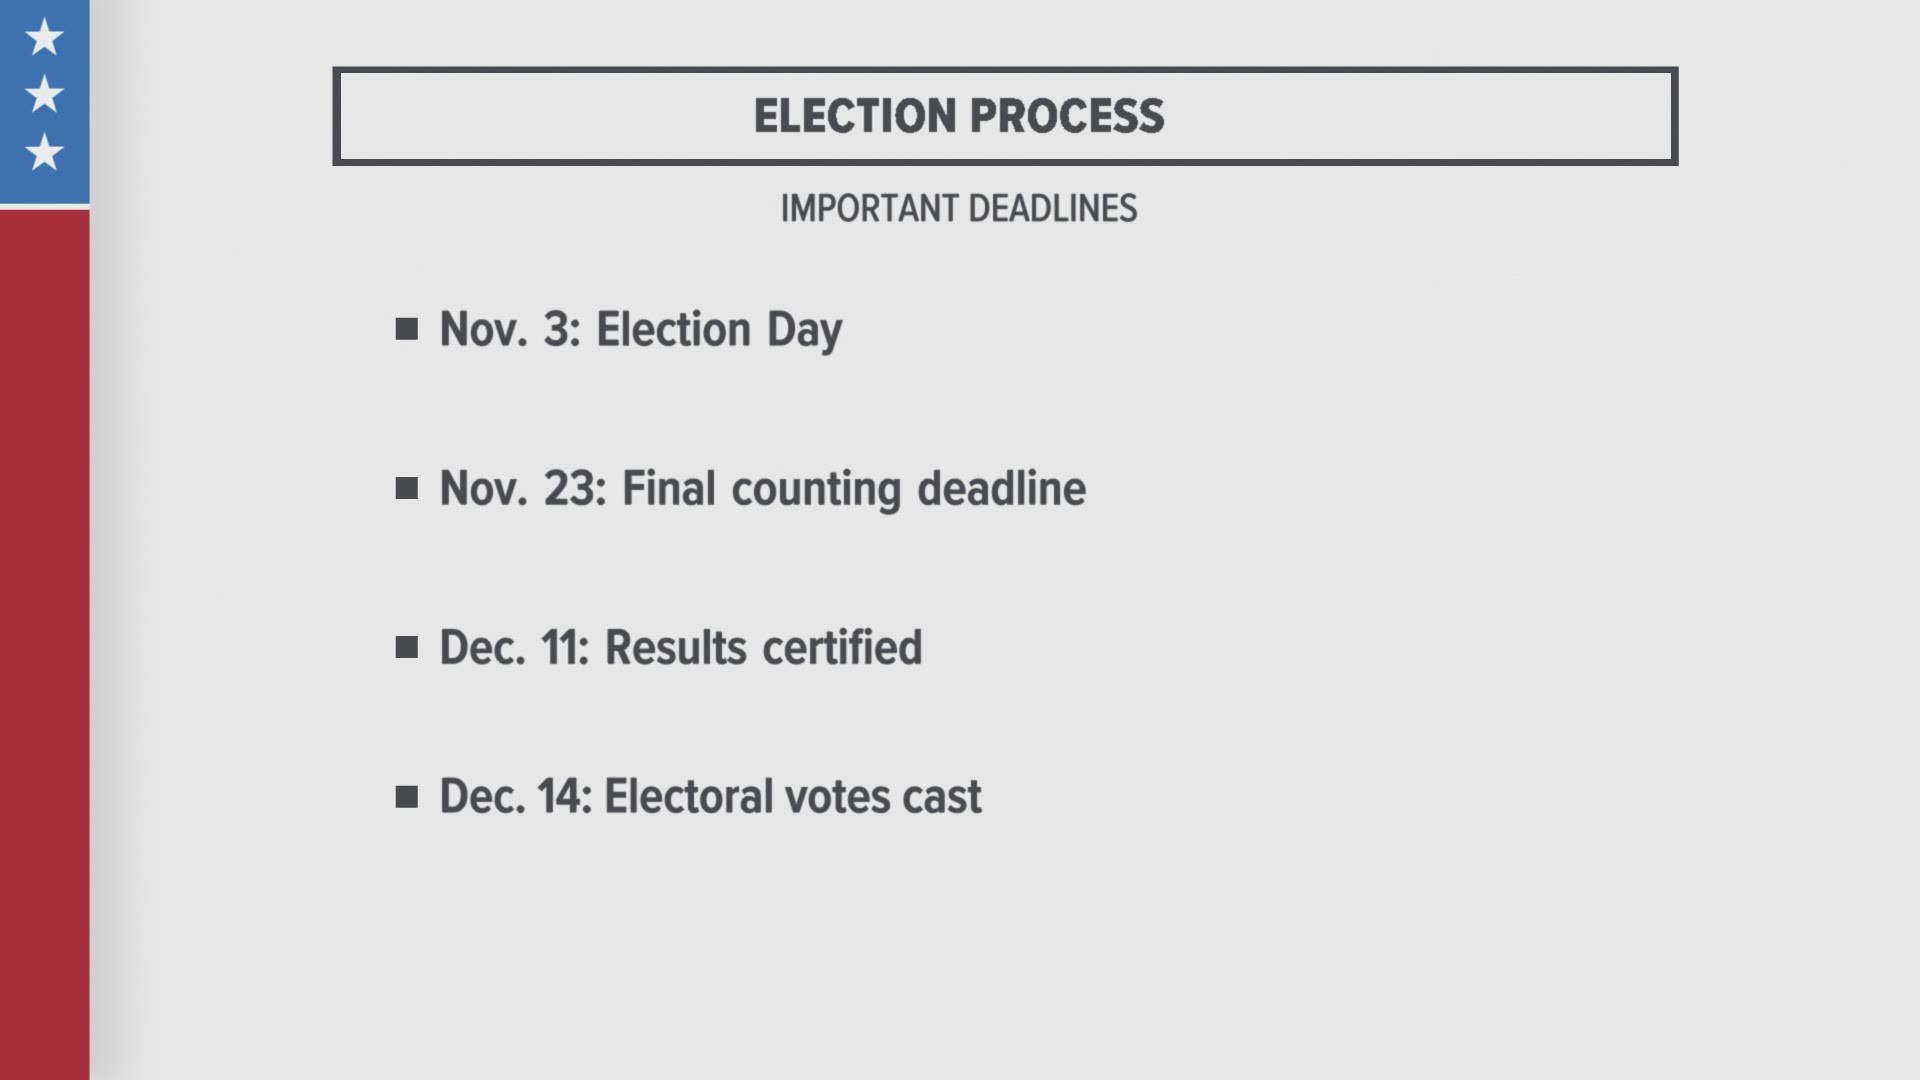 Votes can be counter until Nov. 23 in some states and then electoral votes are cast on Dec. 14